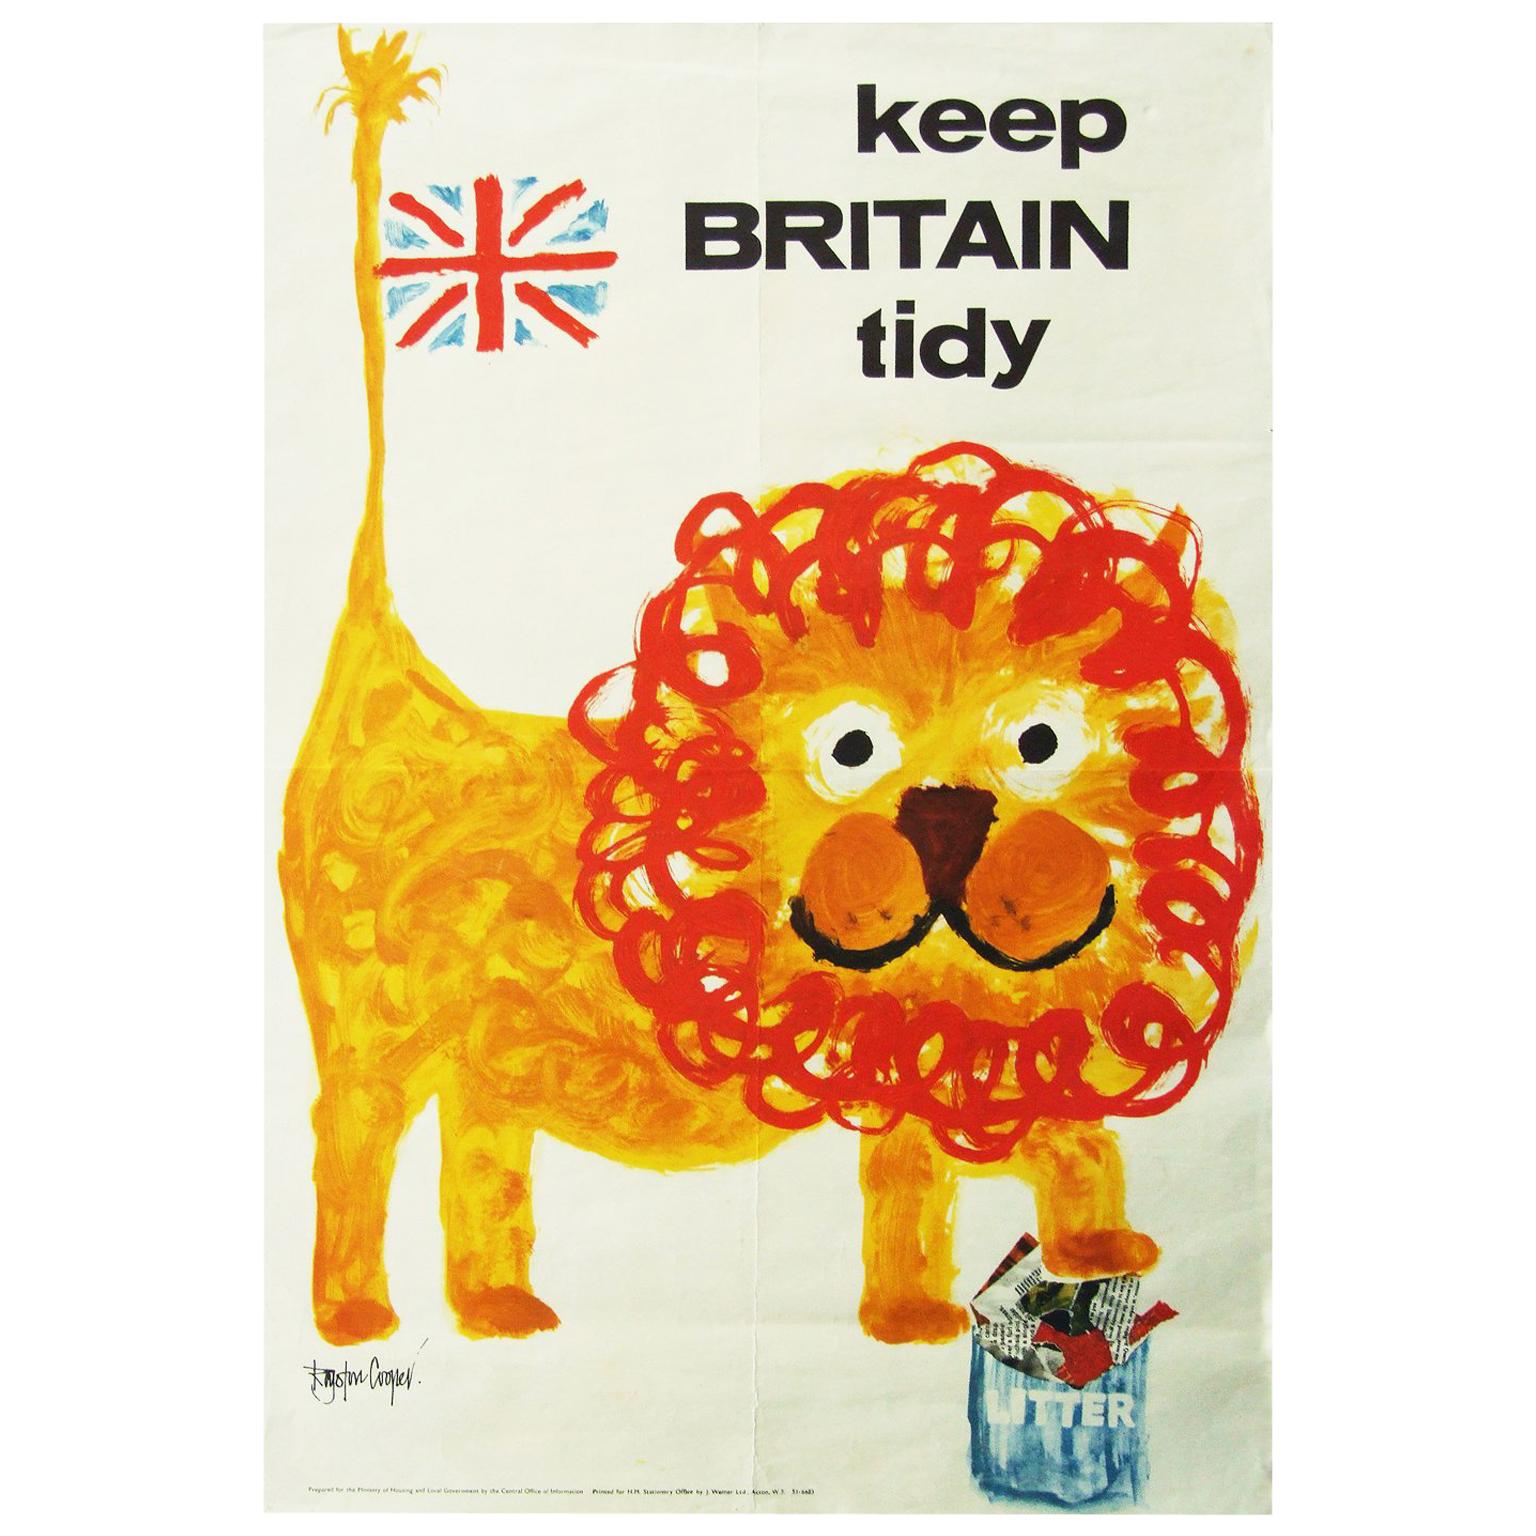 Original 1962 promotional poster for the Keep Britain Tidy Campaign designed by Royston Cooper.

First edition color offset lithograph.

Folded.

Measures: L 74cm x W 50.5cm.